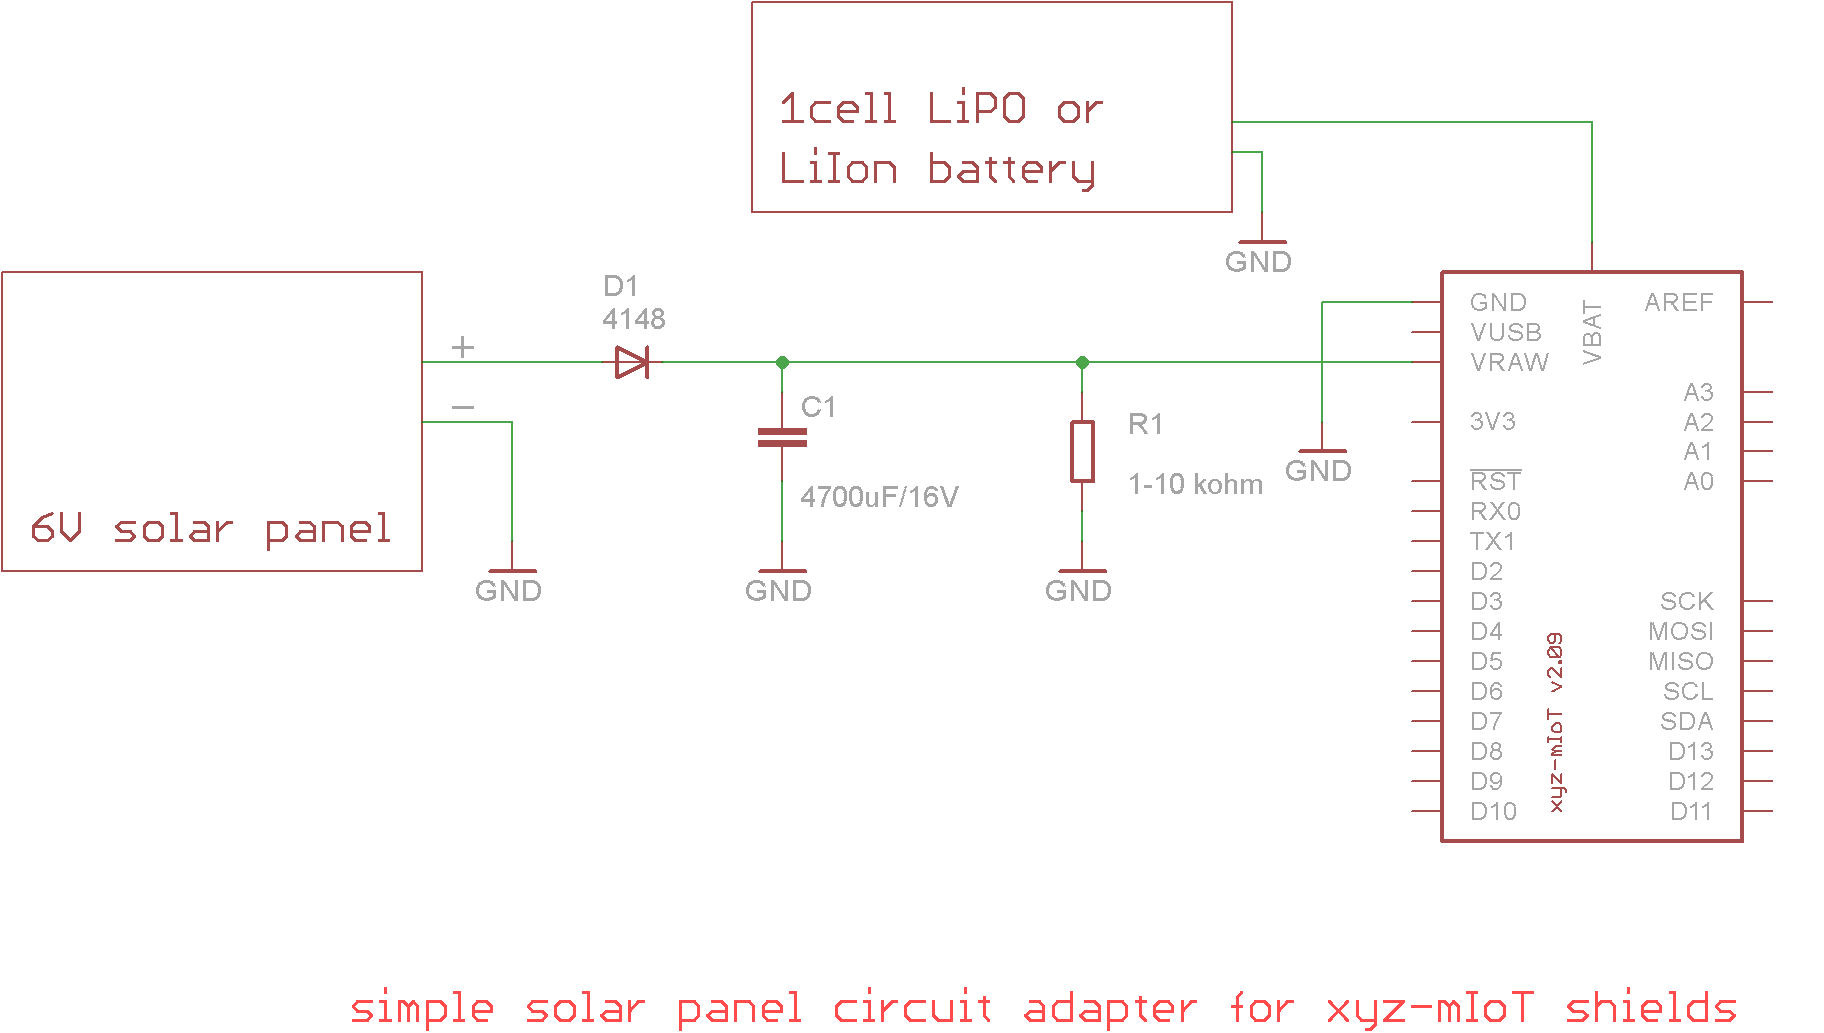 xyz-mIoT modemless version - simple 6V solar panel adapter circuit